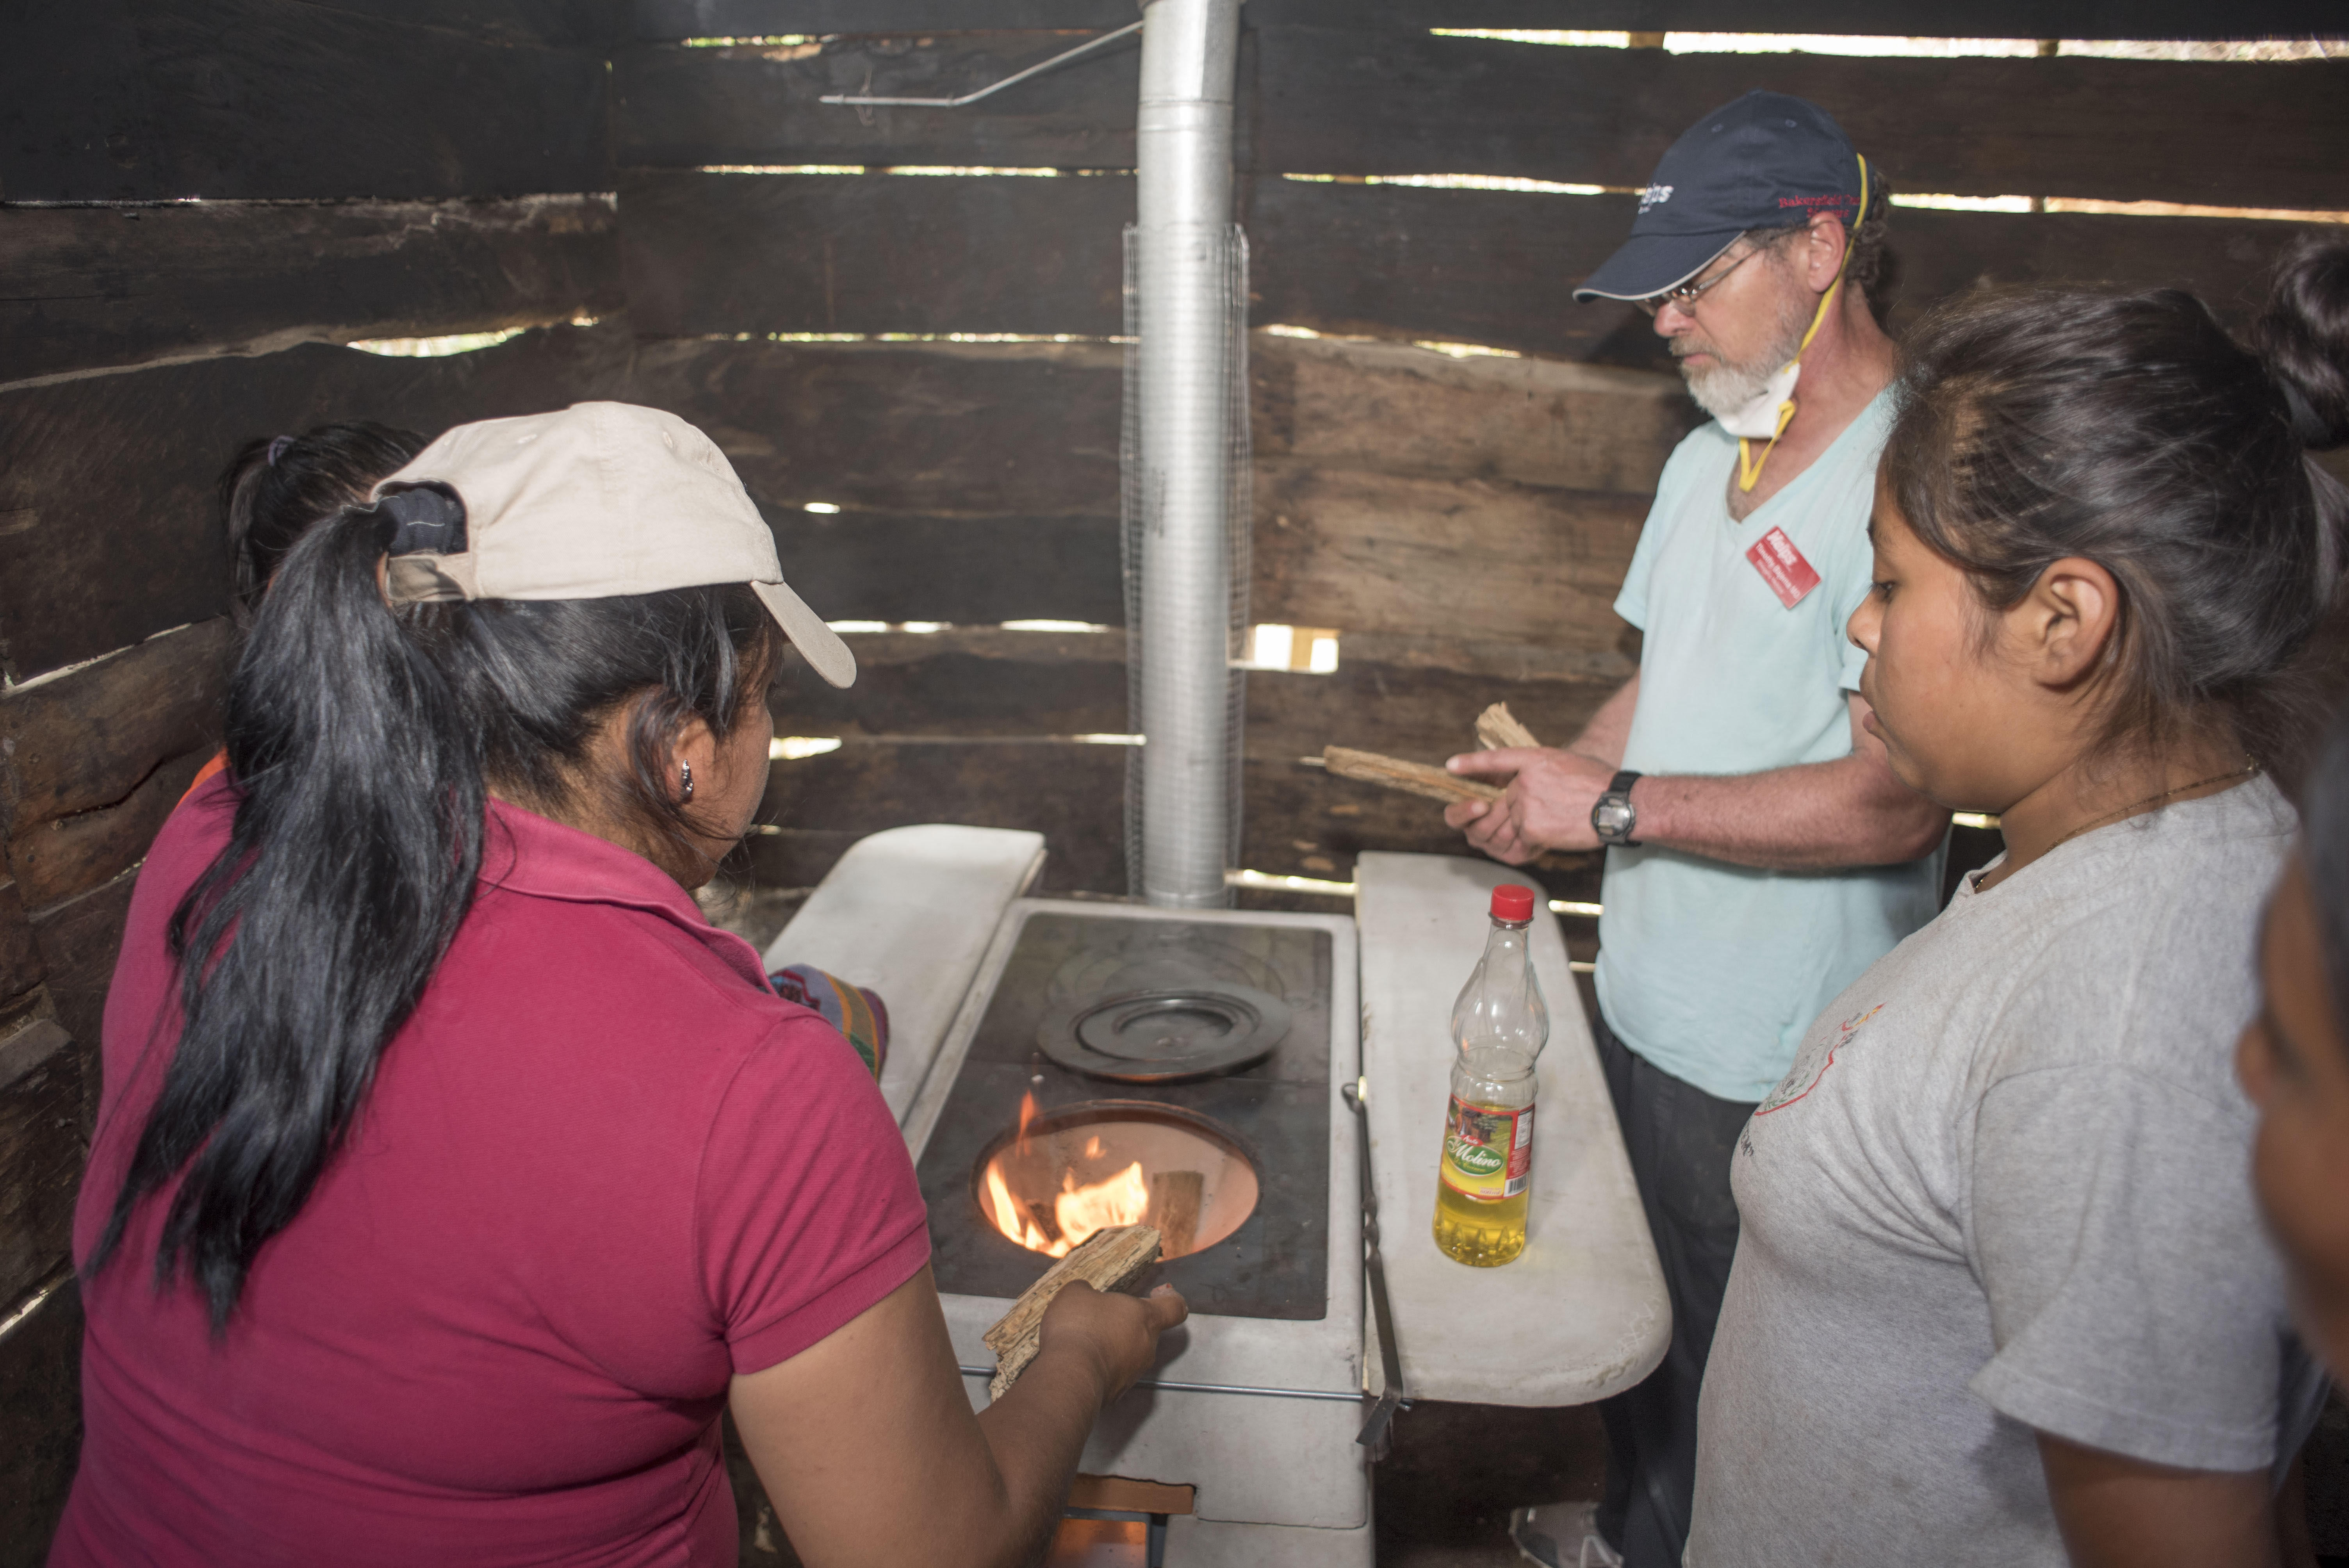 ACX purchased credits from a project that distributes fuel-efficient cook stoves to households across Guatemala.